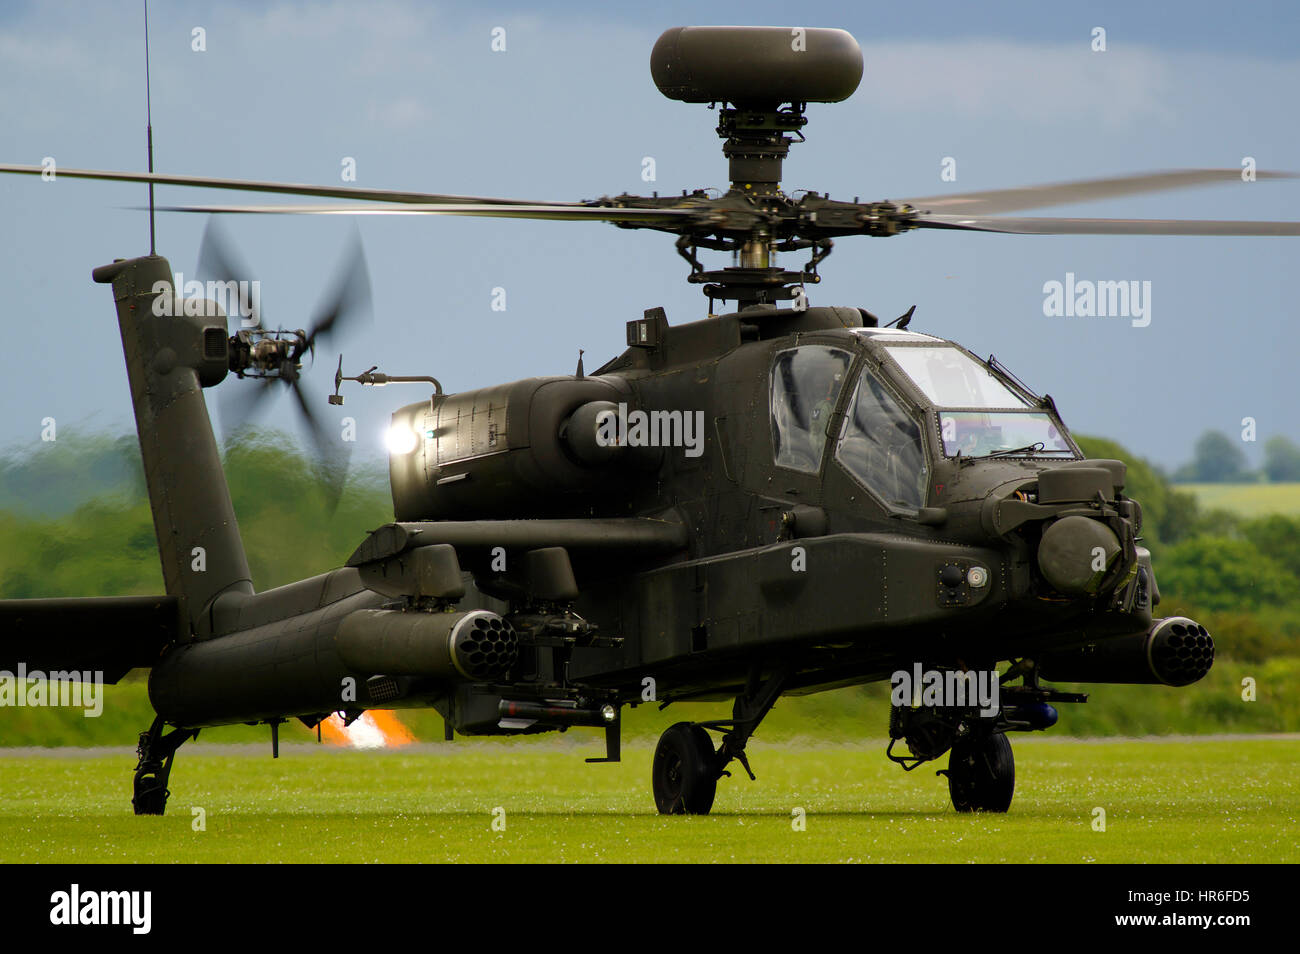 Boeng AH-64 Apache Helicopter at Duxford, Stock Photo